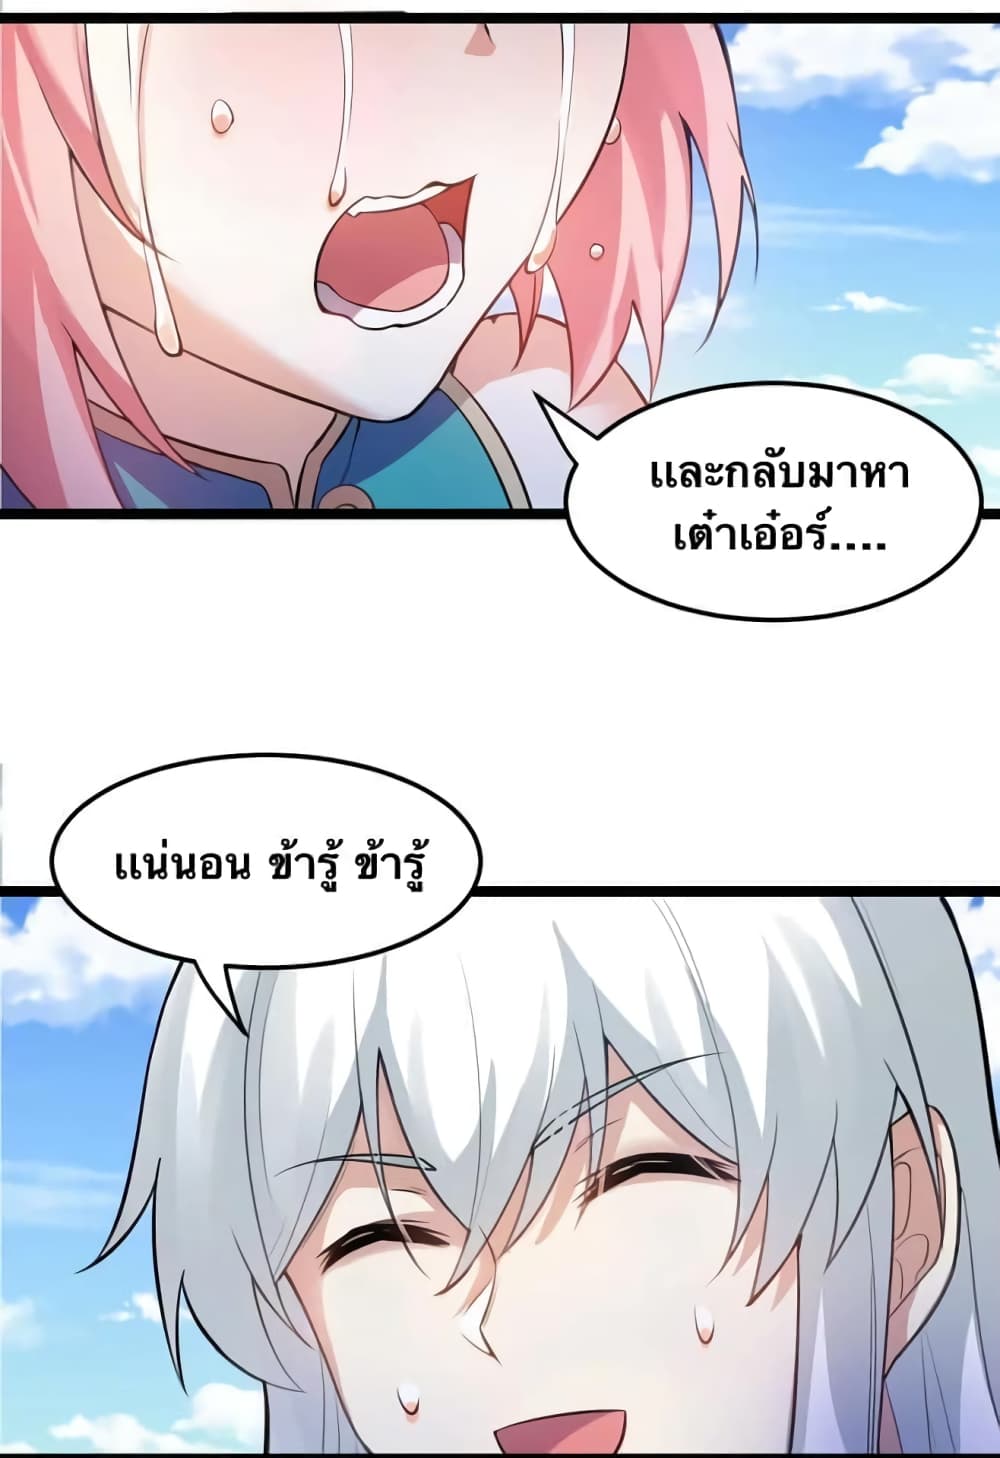 Godsian Masian from Another World ตอนที่ 99 (35)